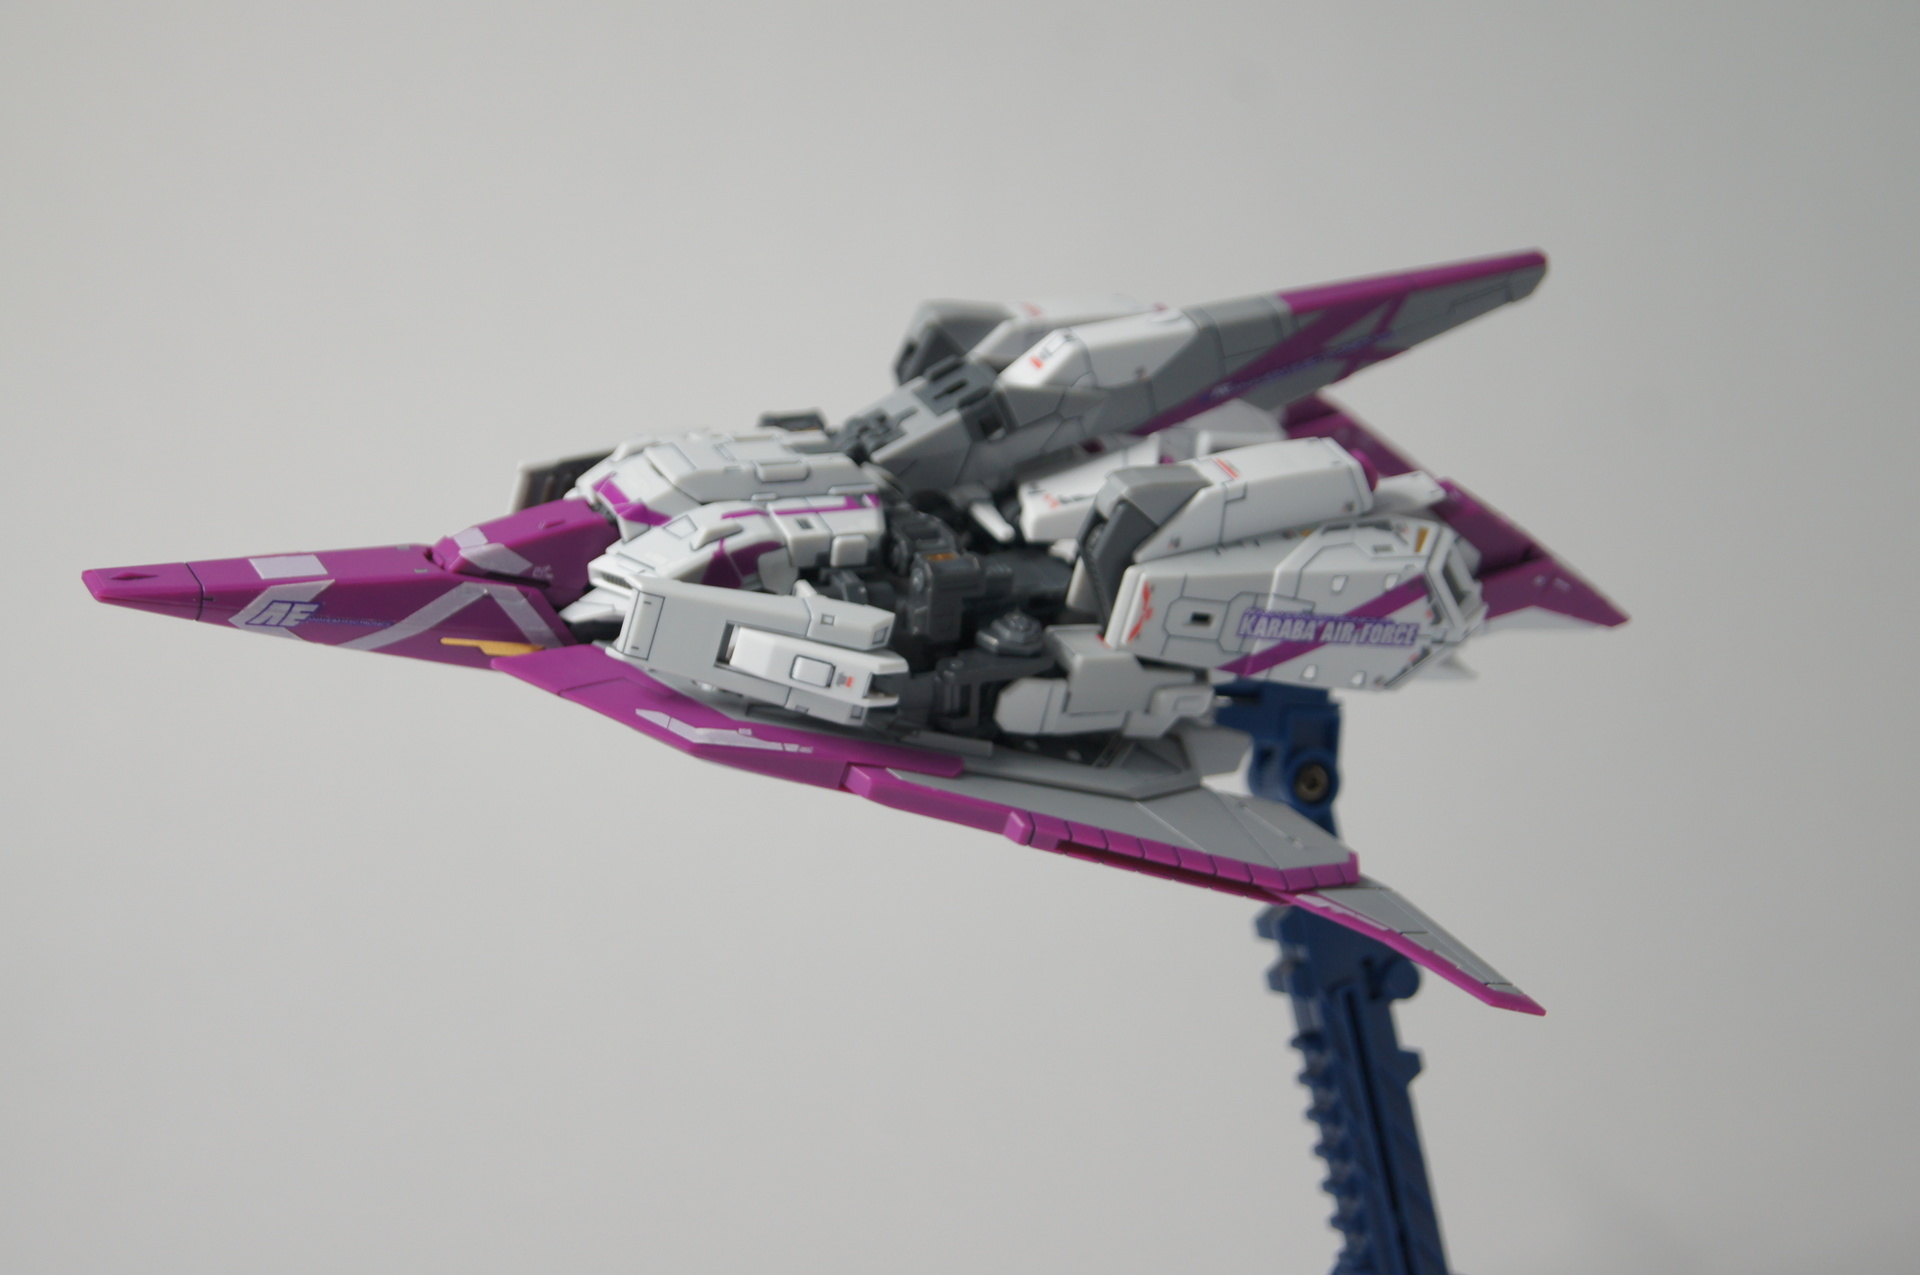 Rg Zガンダム3号機 初期検証型 Ver Gft Limited Color Wave Rider 8 878の あすなろ う